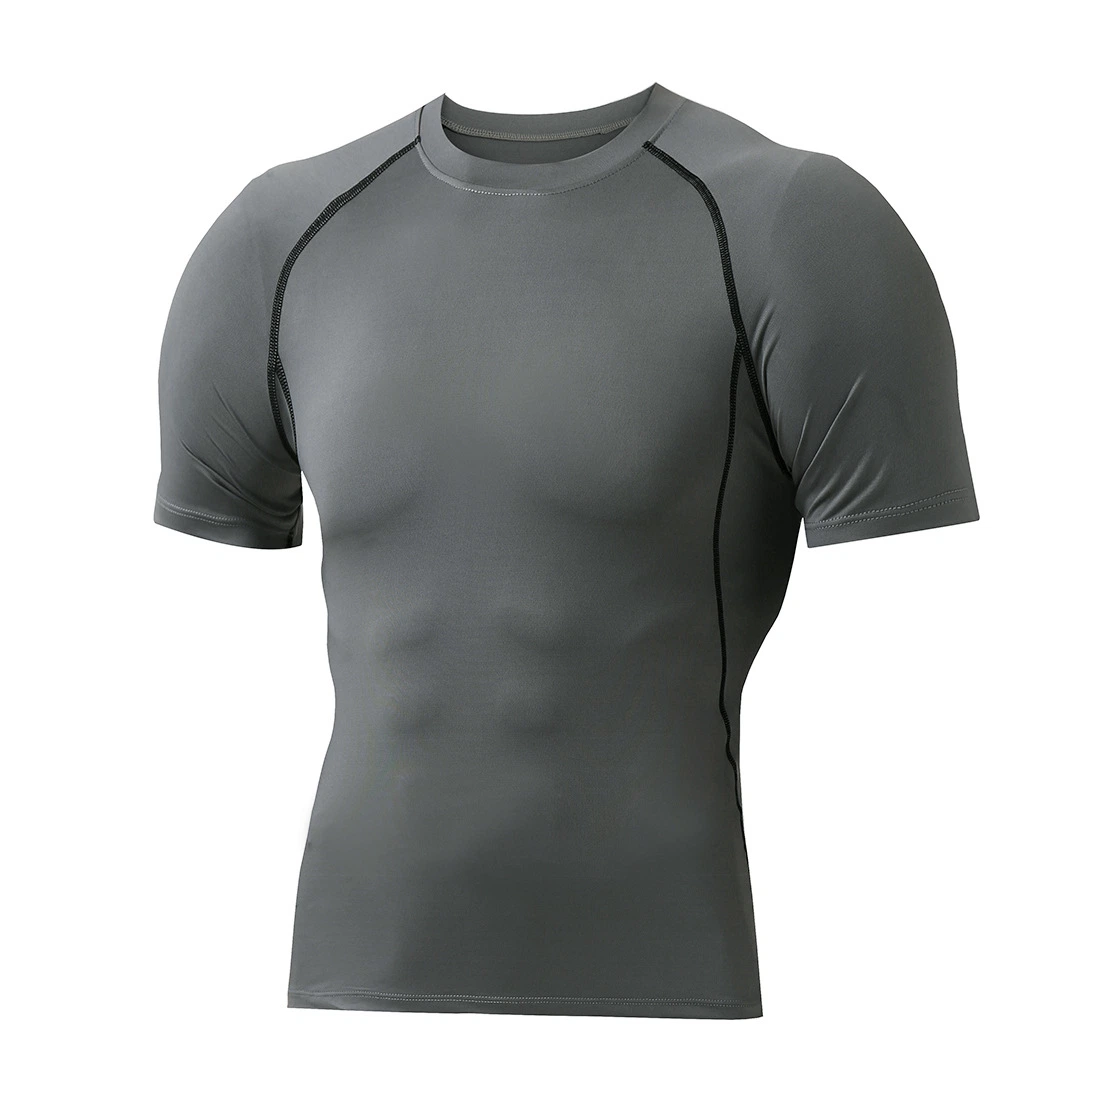 Men's PRO Fitness Jacket Tight Short-Sleeve T-Shirt Basketball Muscle Quick-Drying Top Sportswear